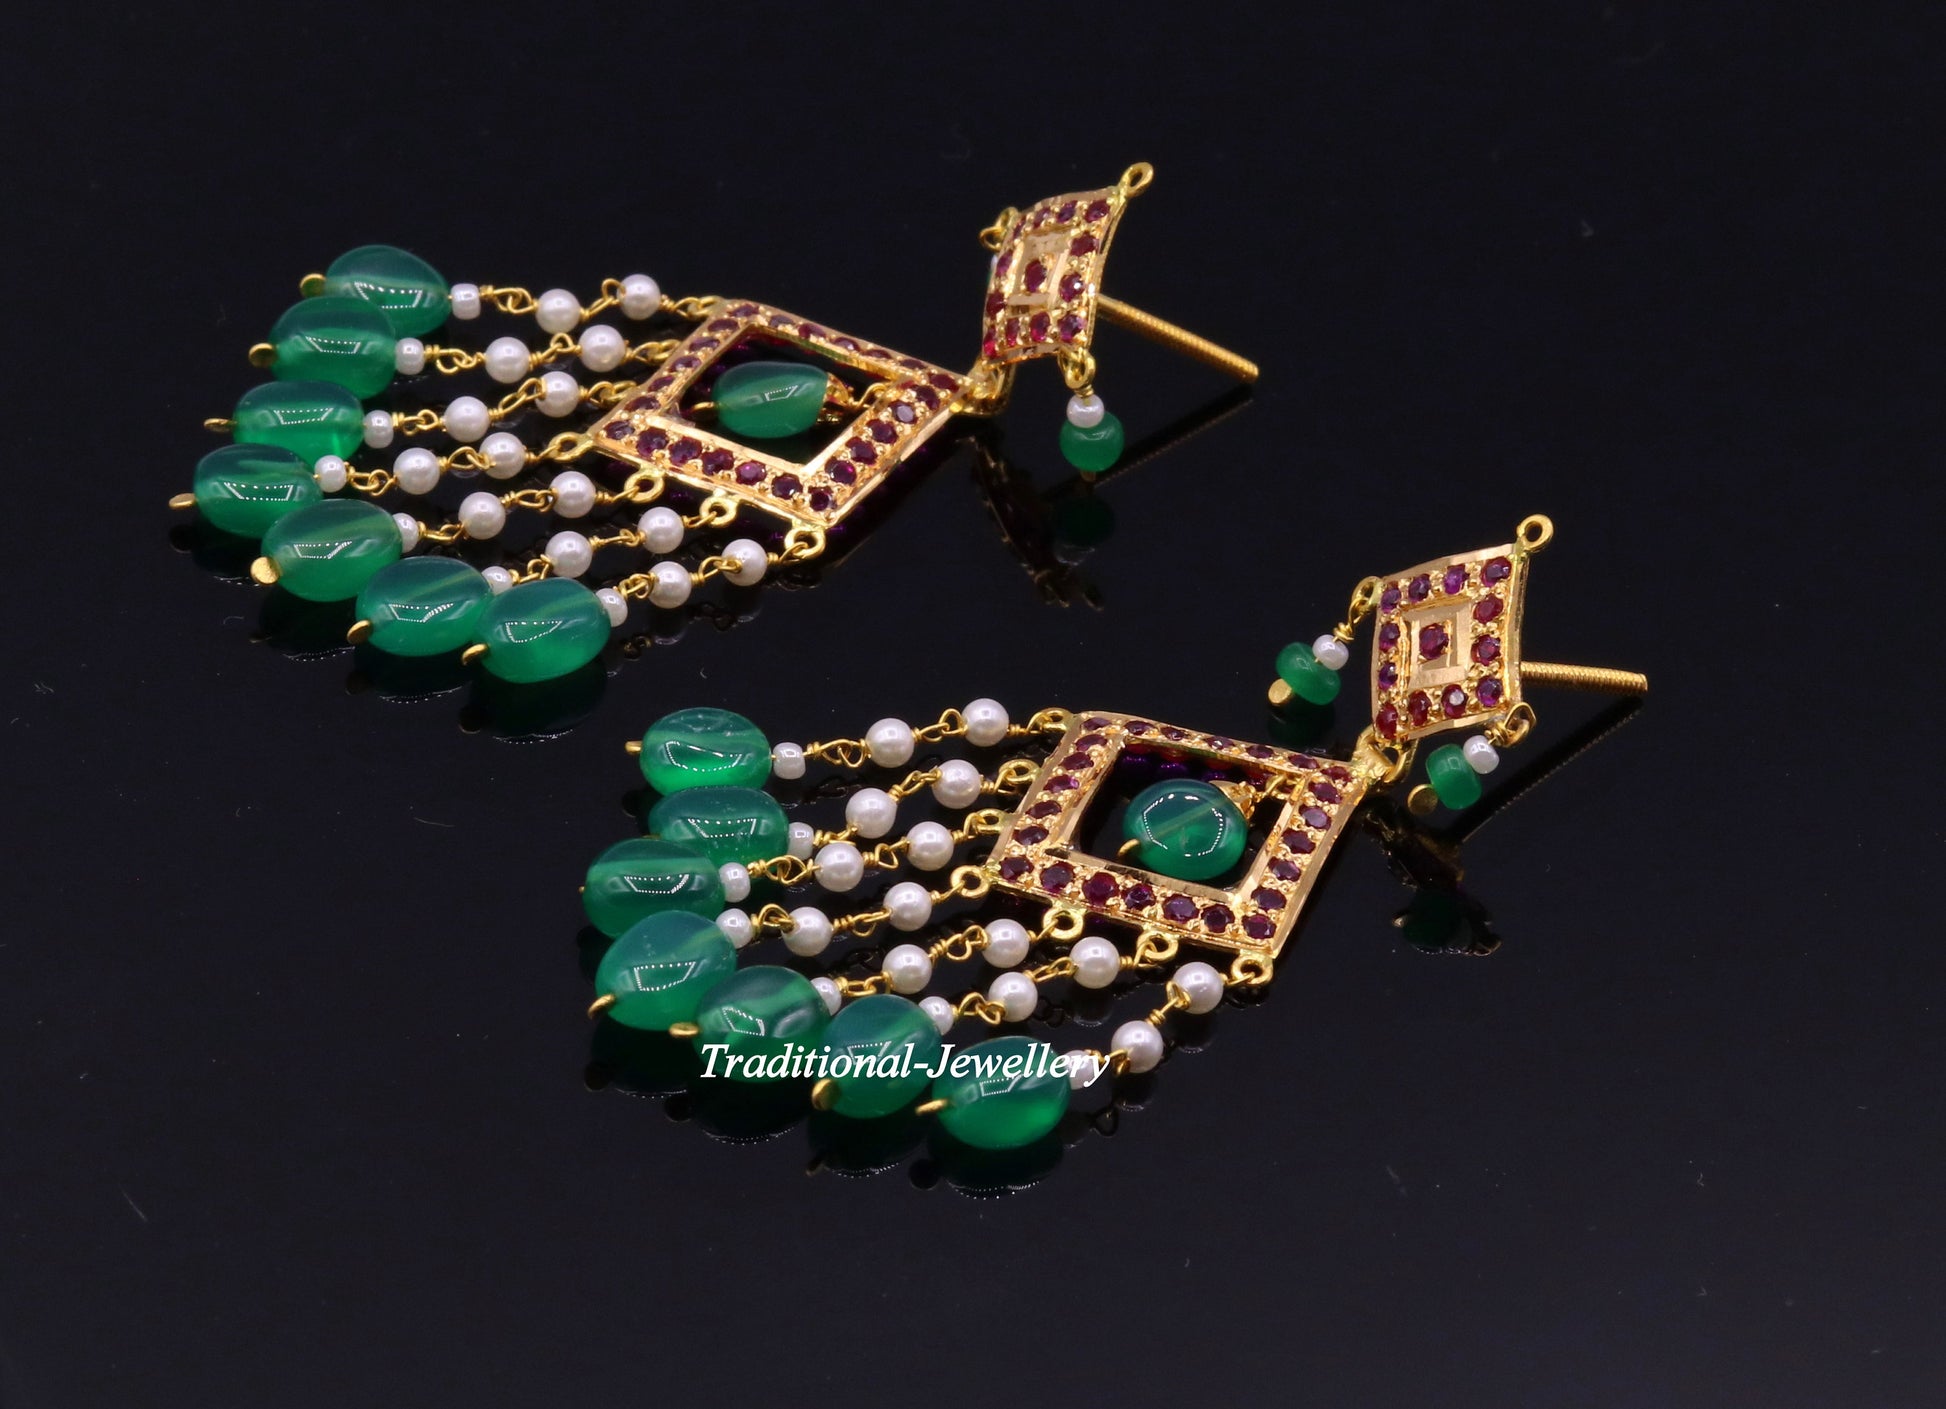 Authentic 22kt yellow gold handmade jadau earring dangling fabulous wedding anniversary gifting jewelry from rajasthan India - TRIBAL ORNAMENTS